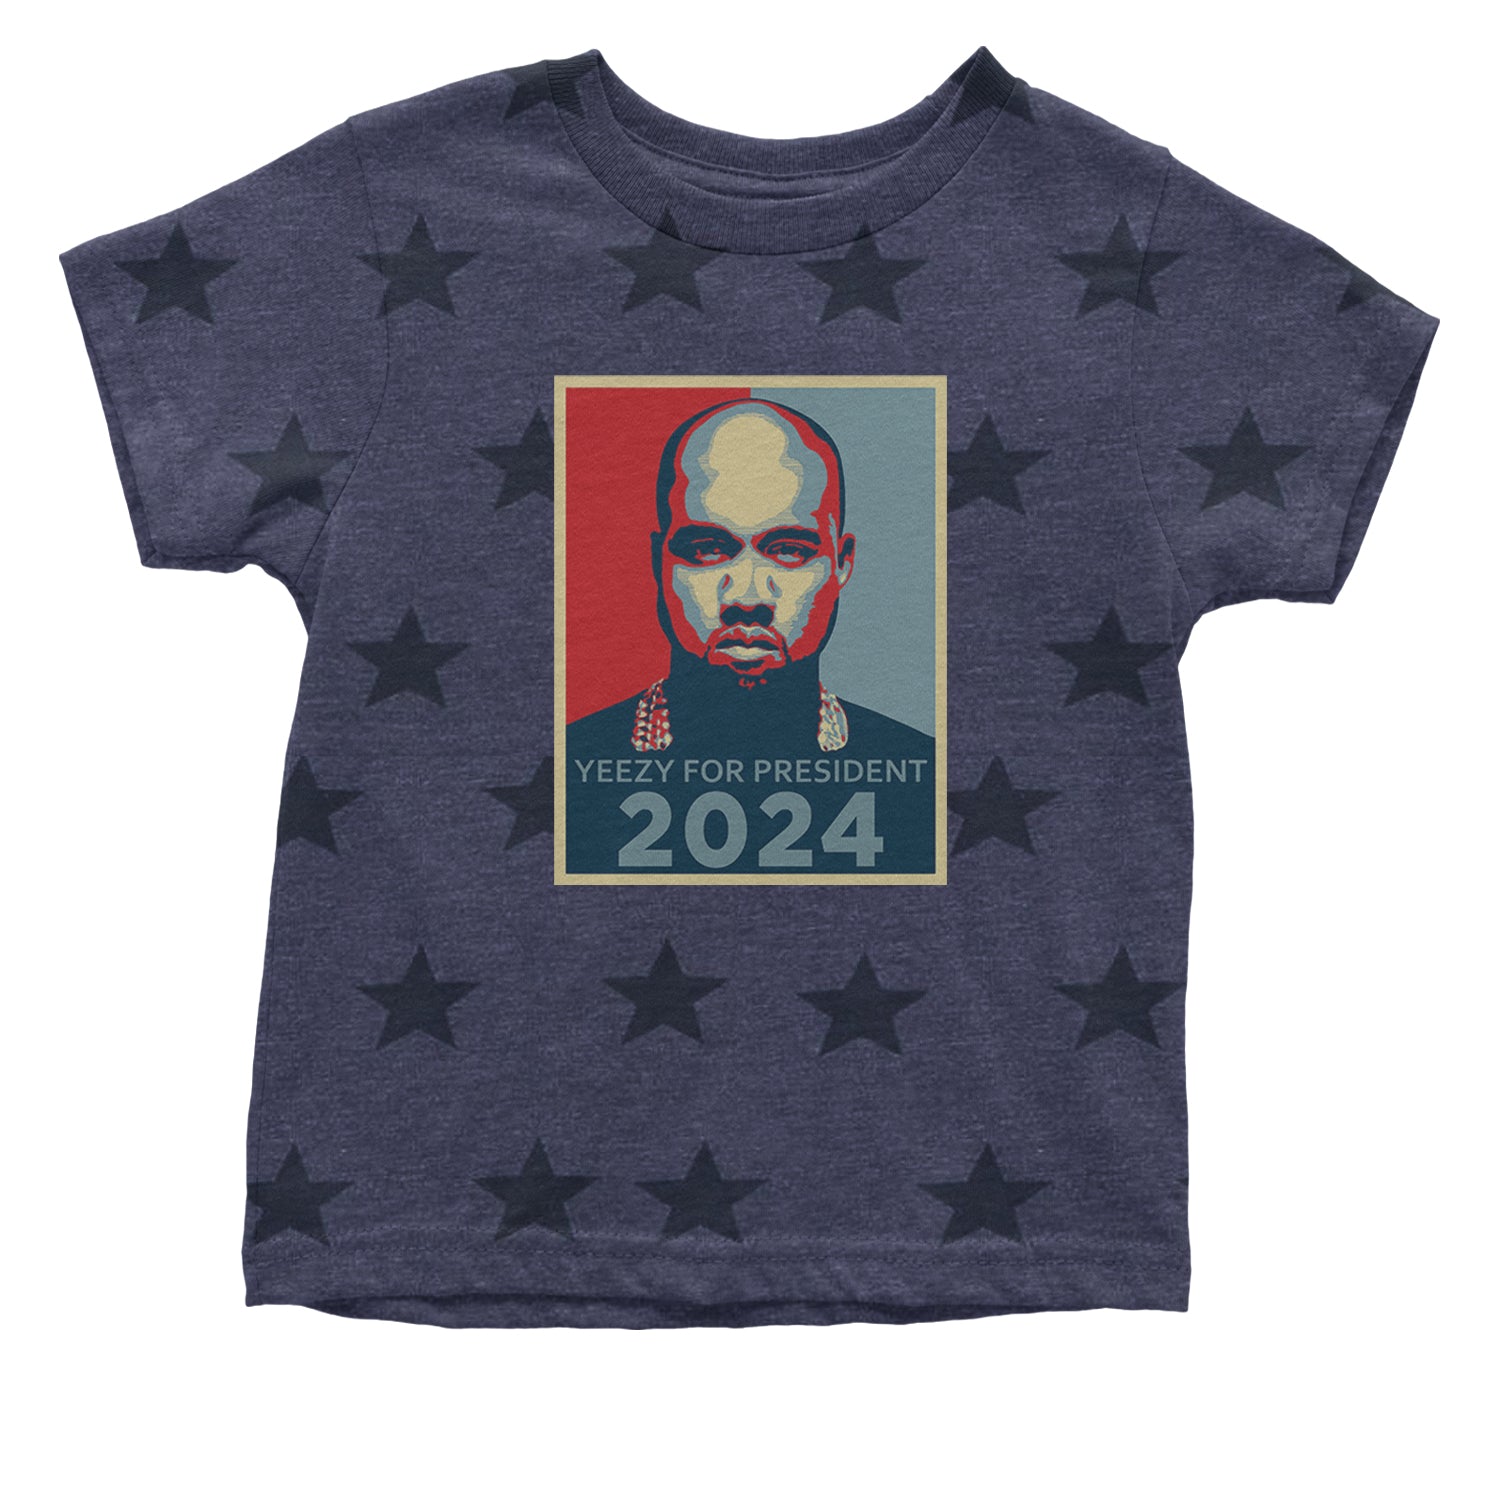 Yeezus For President Vote for Ye Infant One-Piece Romper Bodysuit and Toddler T-shirt Navy Blue STAR